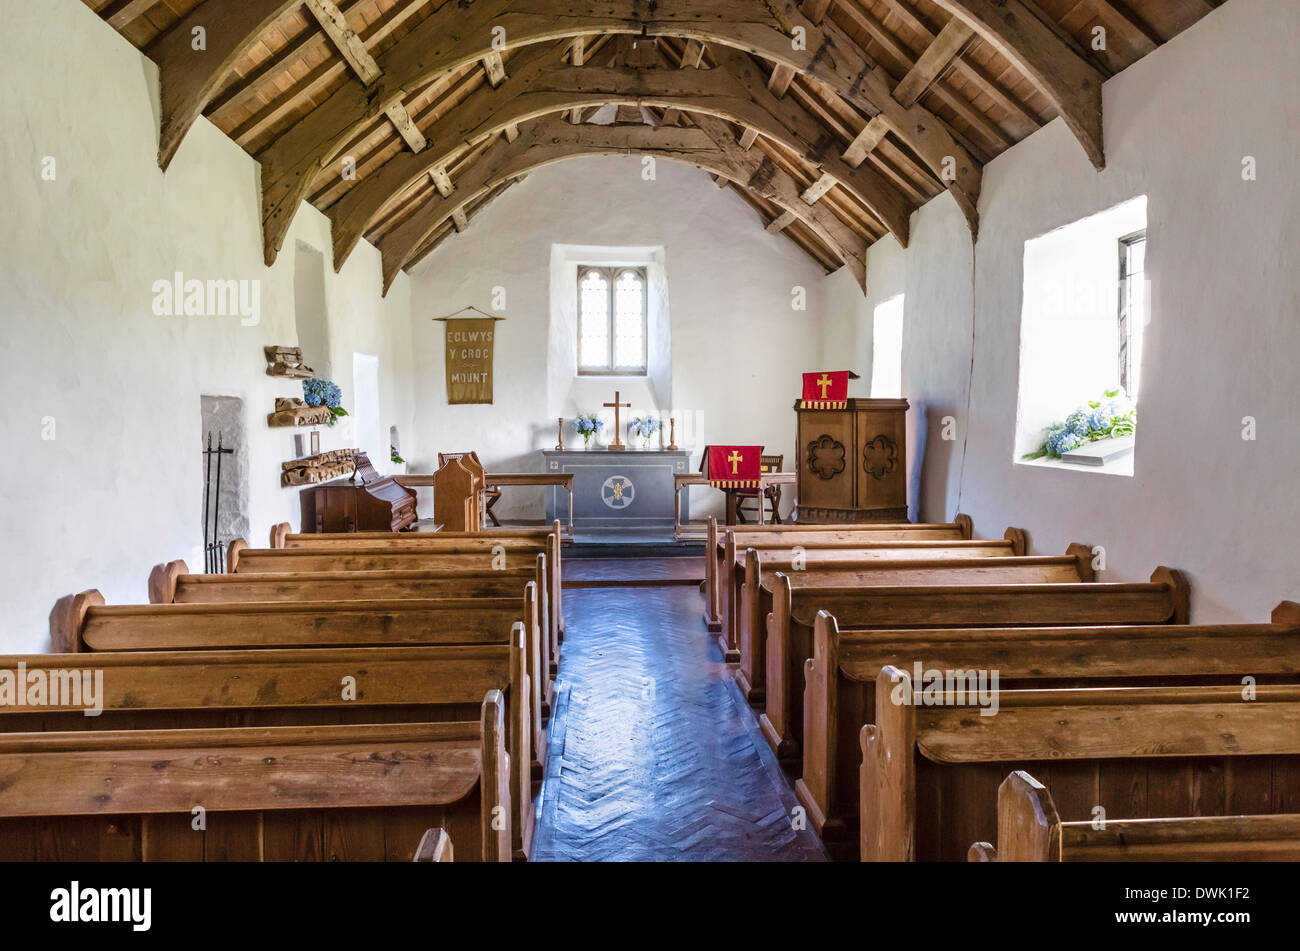 Interior of the Church of the Holy Cross, Mwnt, Ceredigion, Wales, UK Stock Photo